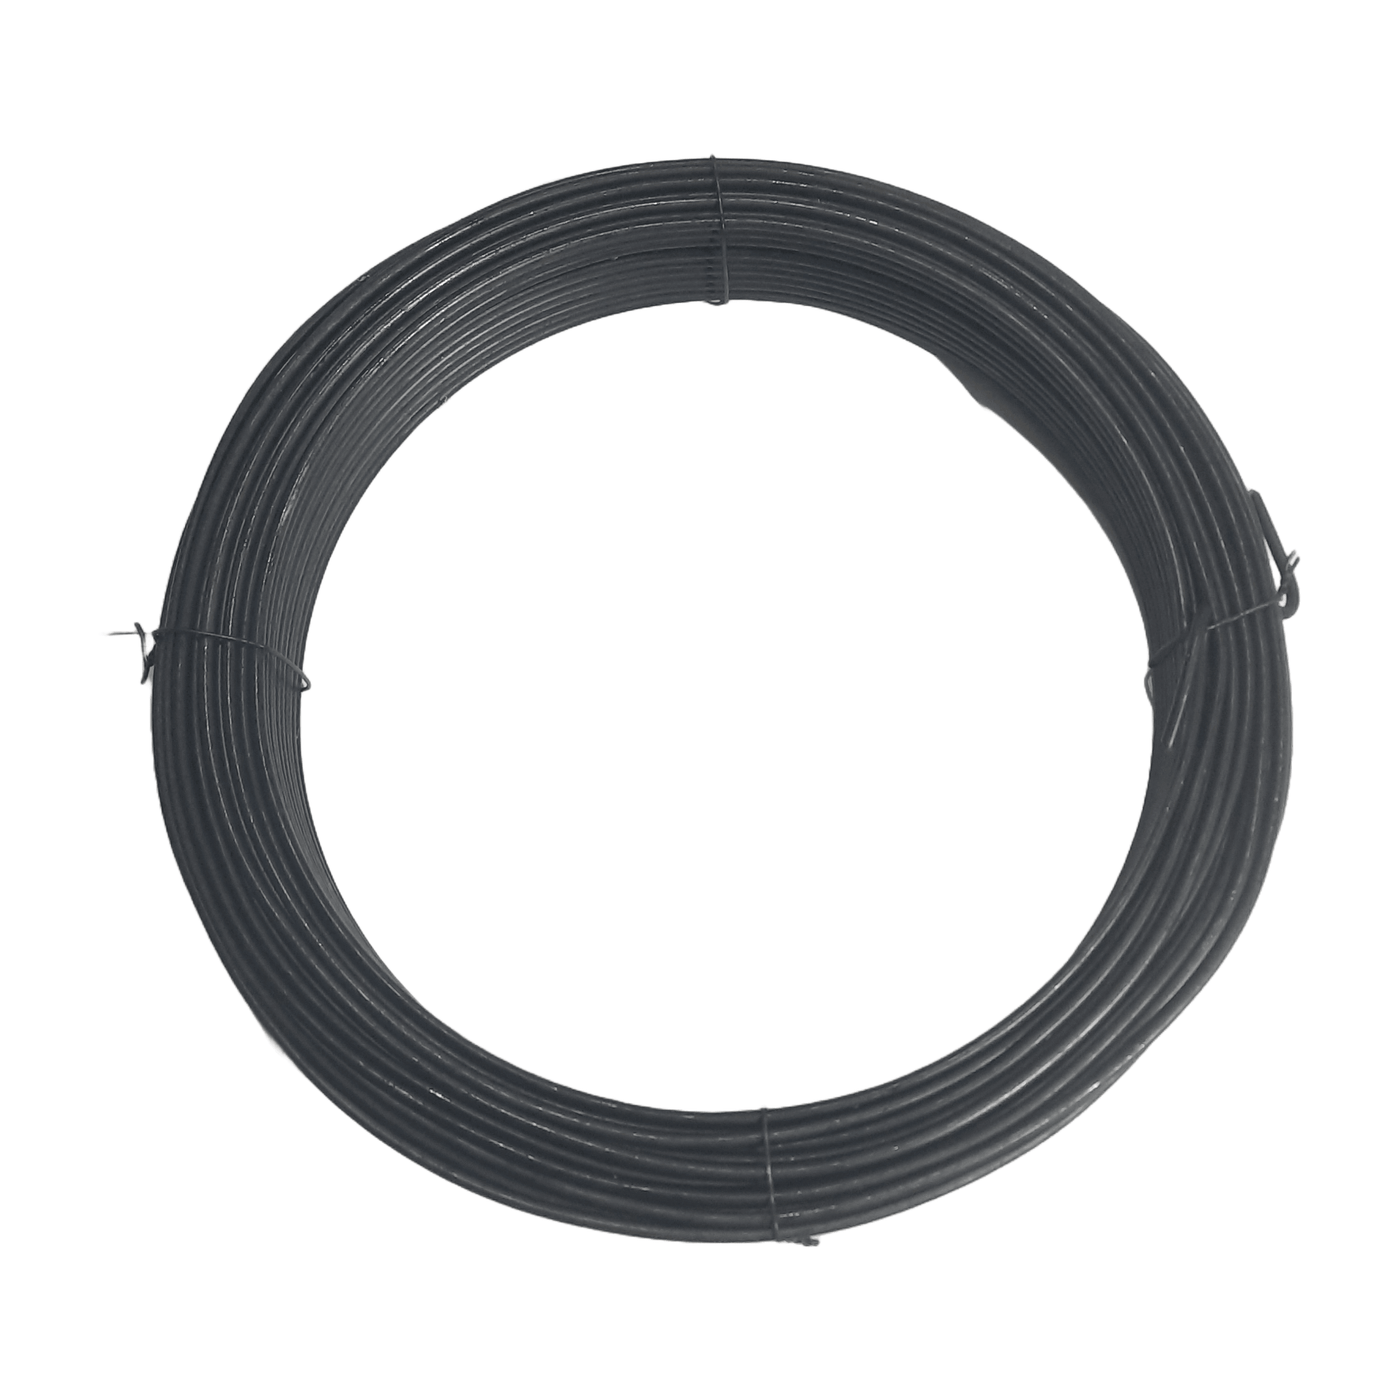 #9 Support Wire - 10LB Roll